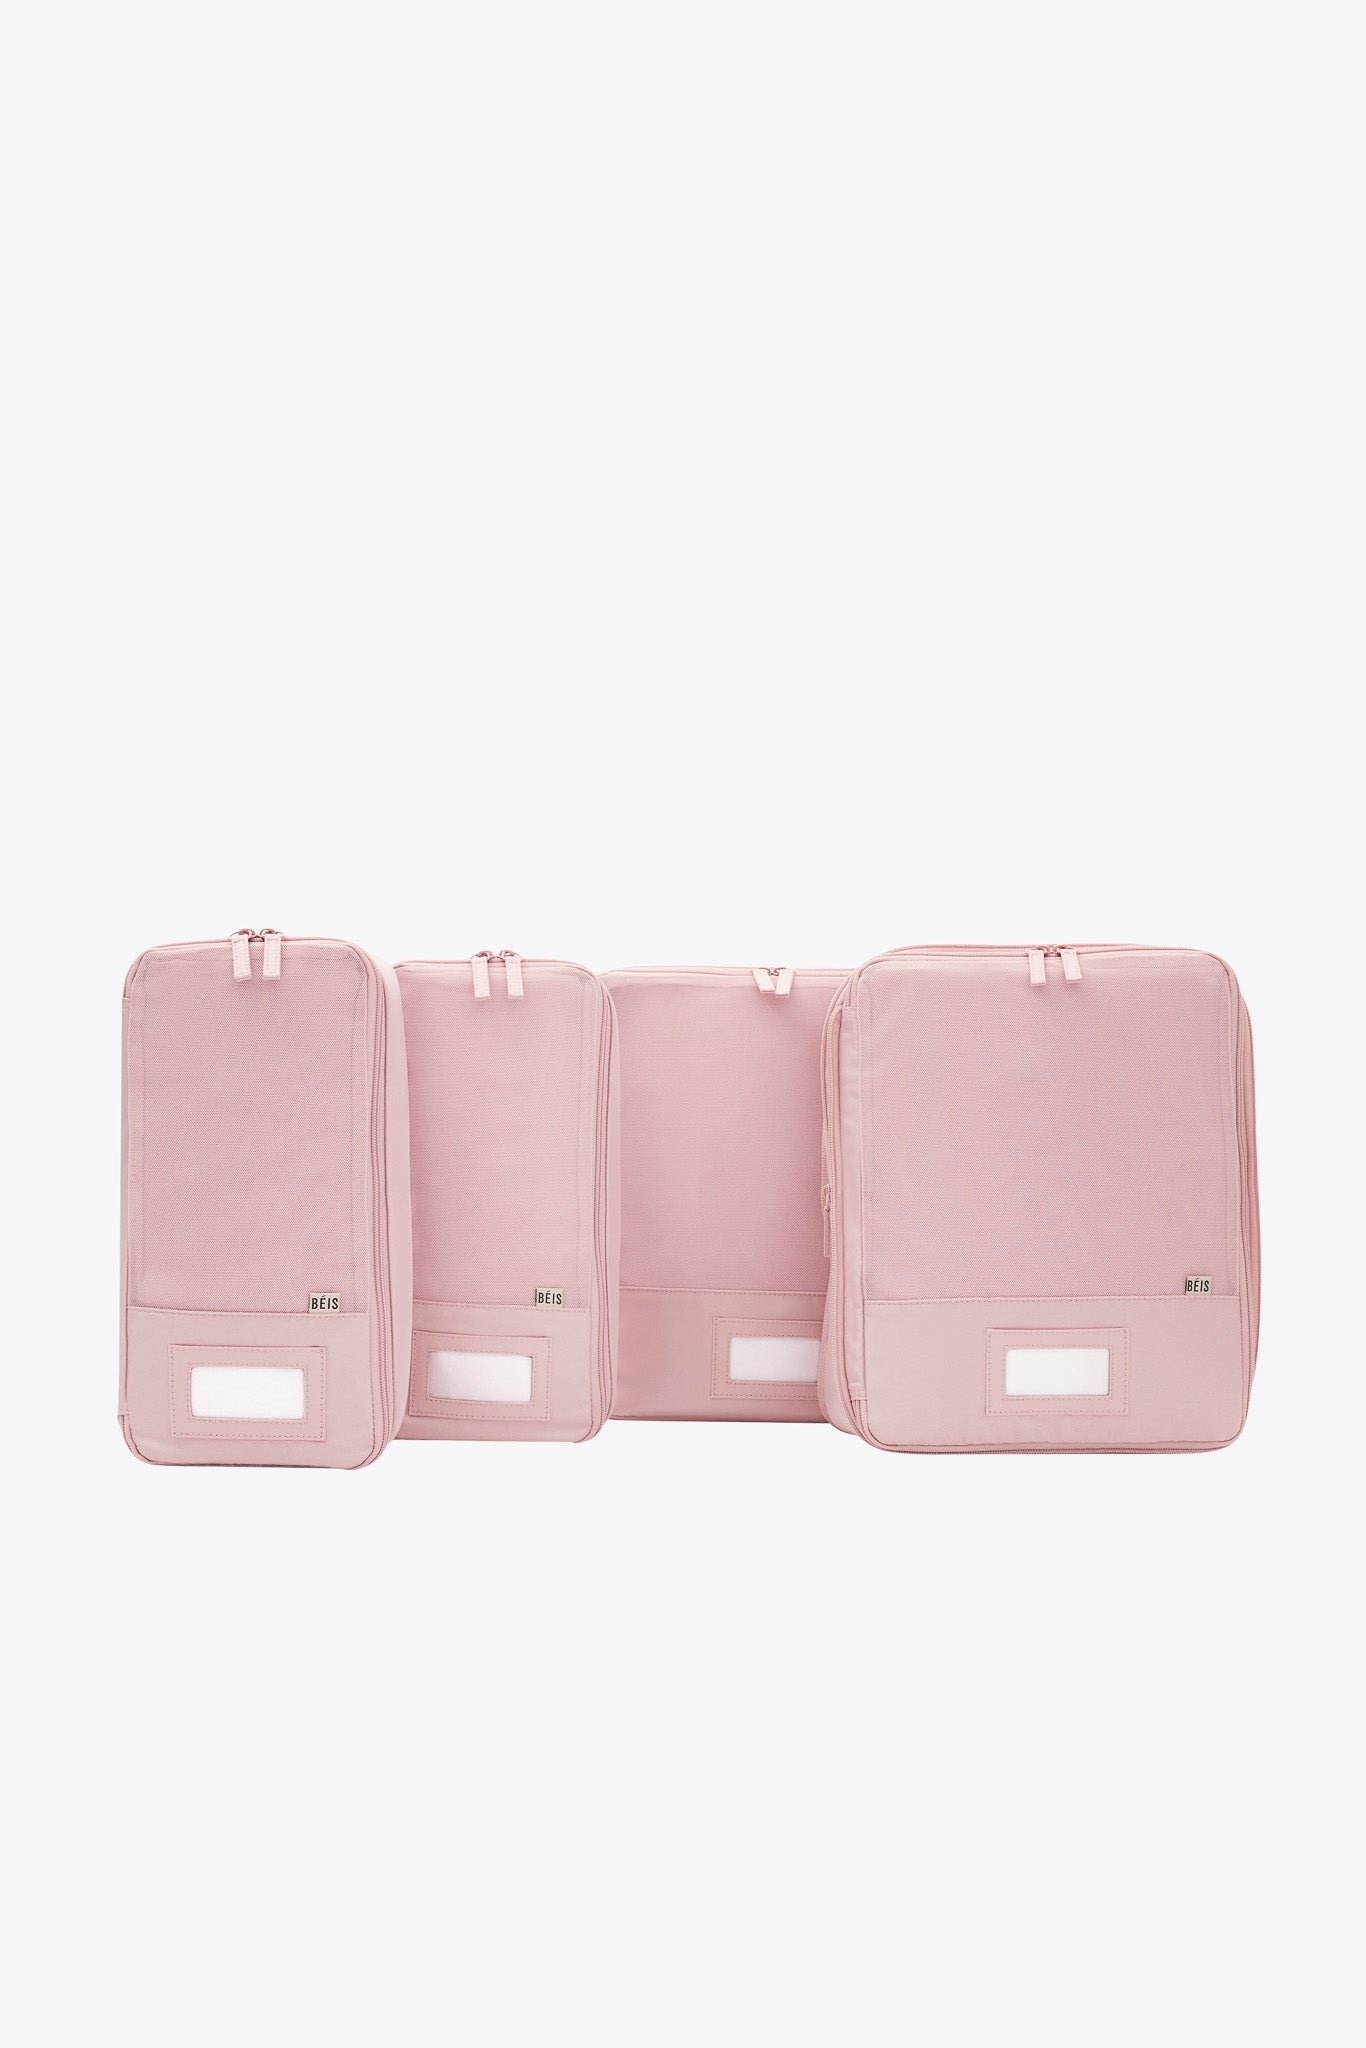 The Compression Packing Cubes 4 pc in Atlas Pink